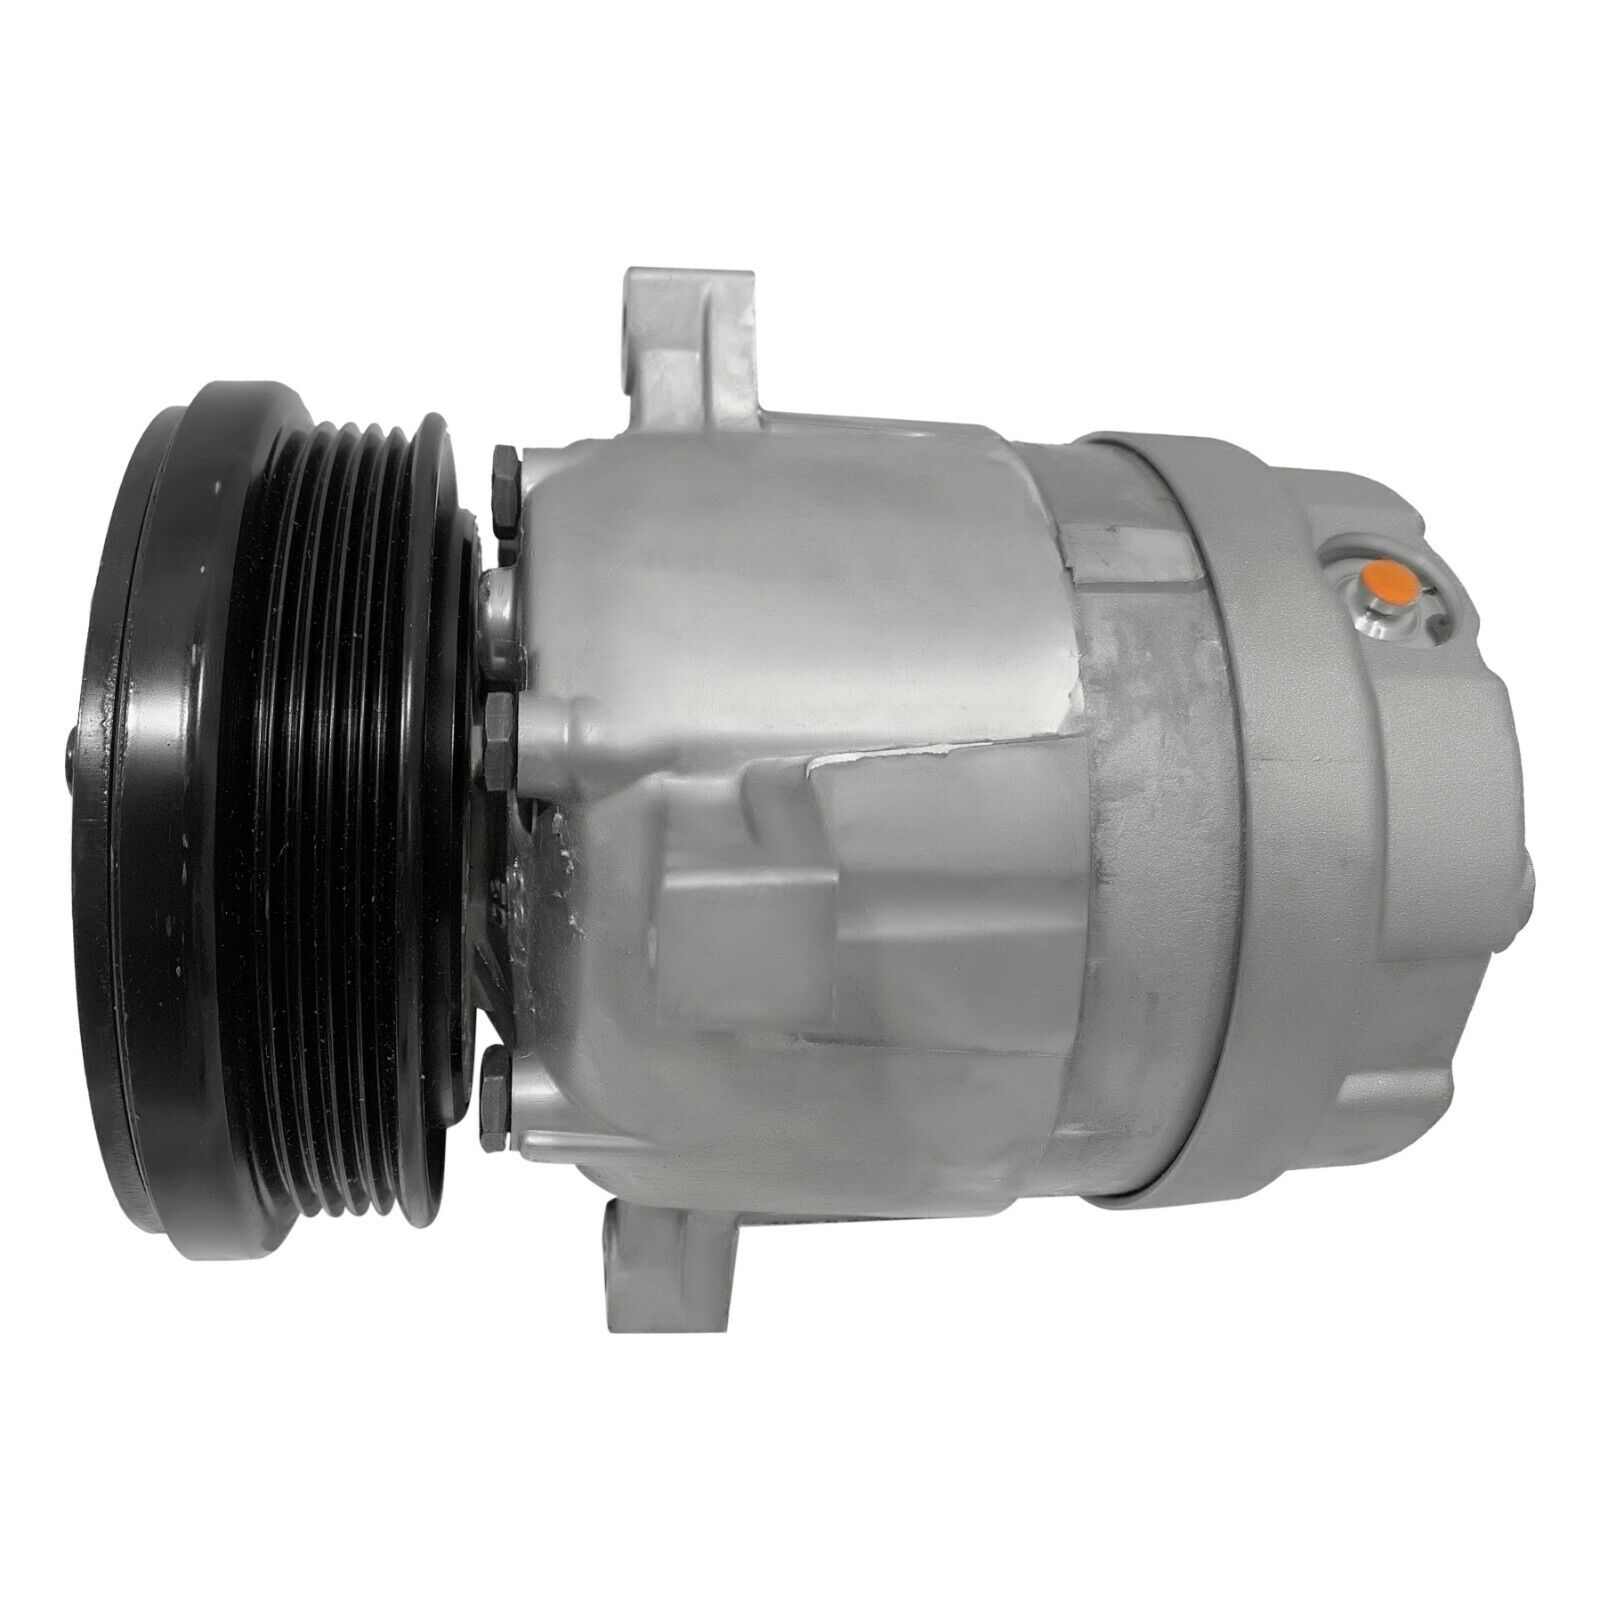 BRAND NEW RYC AC Compressor and A/C Clutch EH276 Fits 87-89 Buick Skyhawk